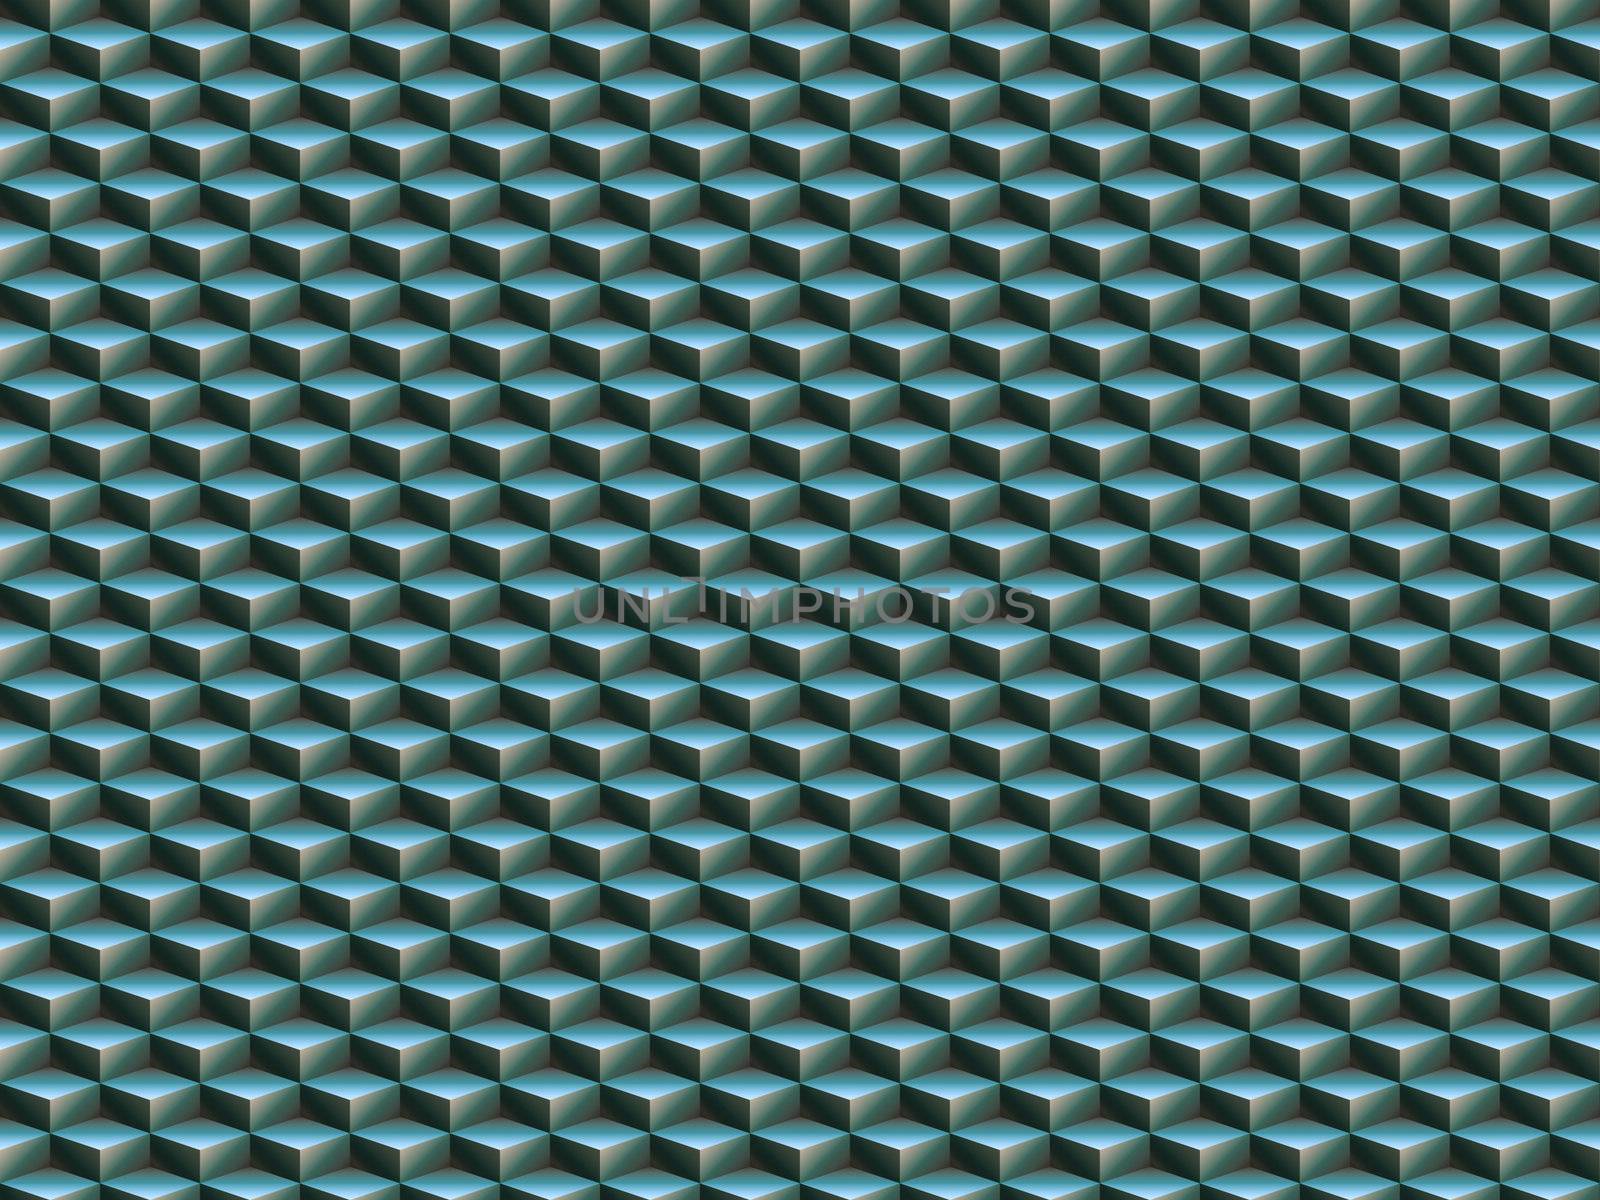 op art illustration that cab be used as a seamless pattern